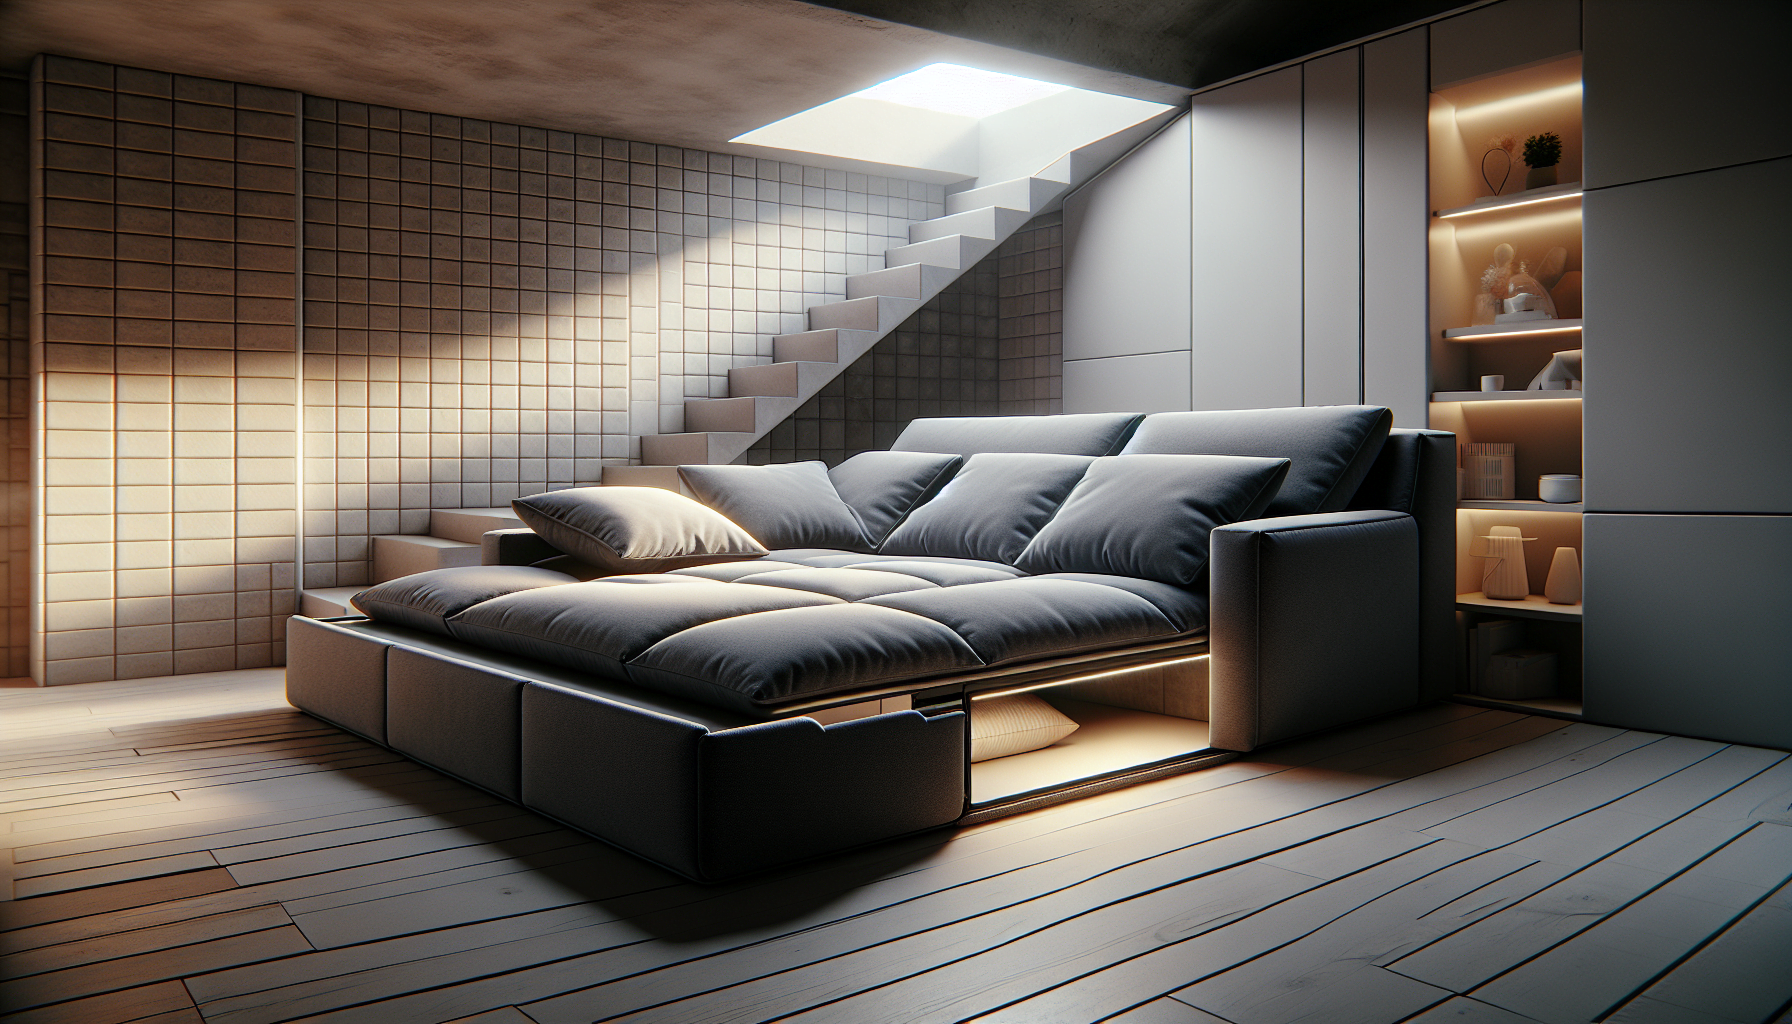 Multi-functional sofa bed for loft space